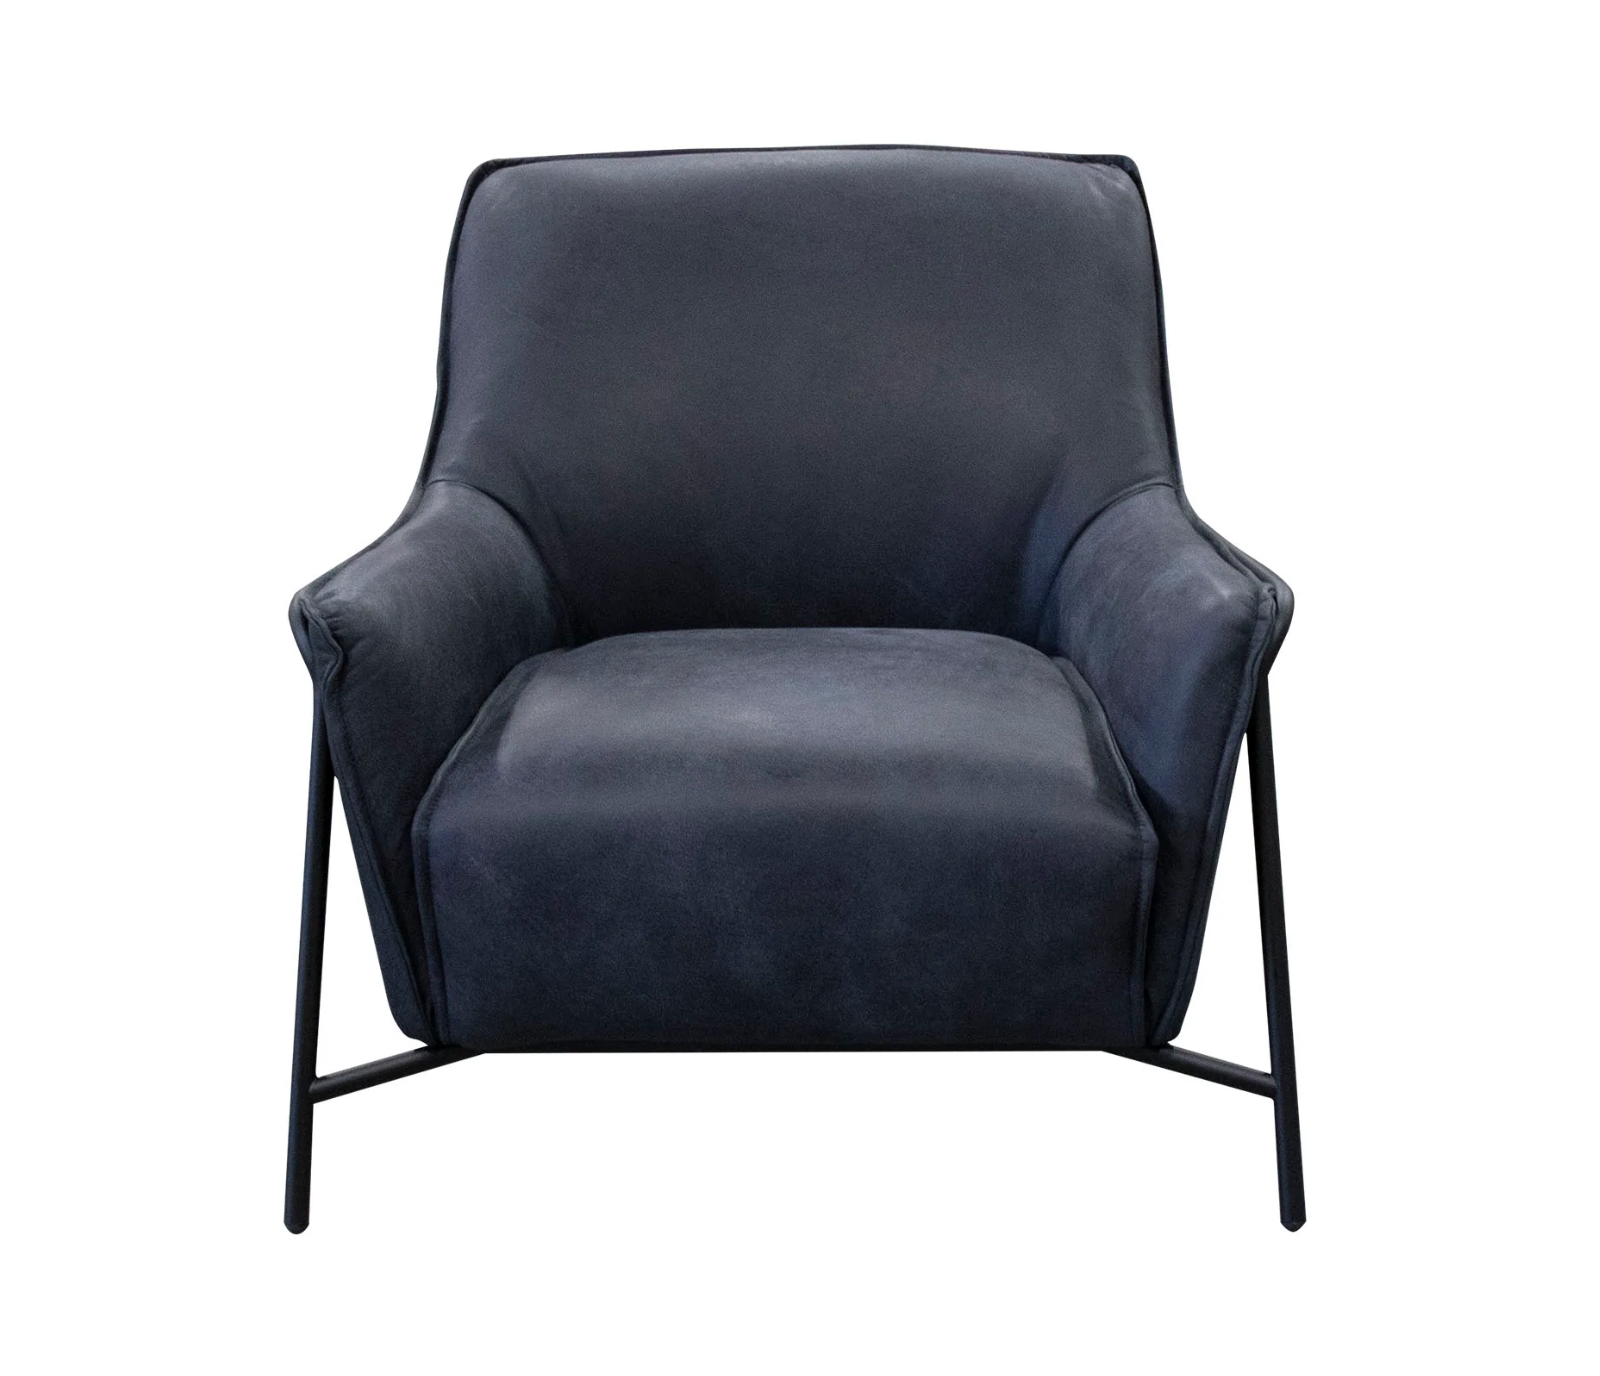 Birba Accent Chair - Natural Black Leather